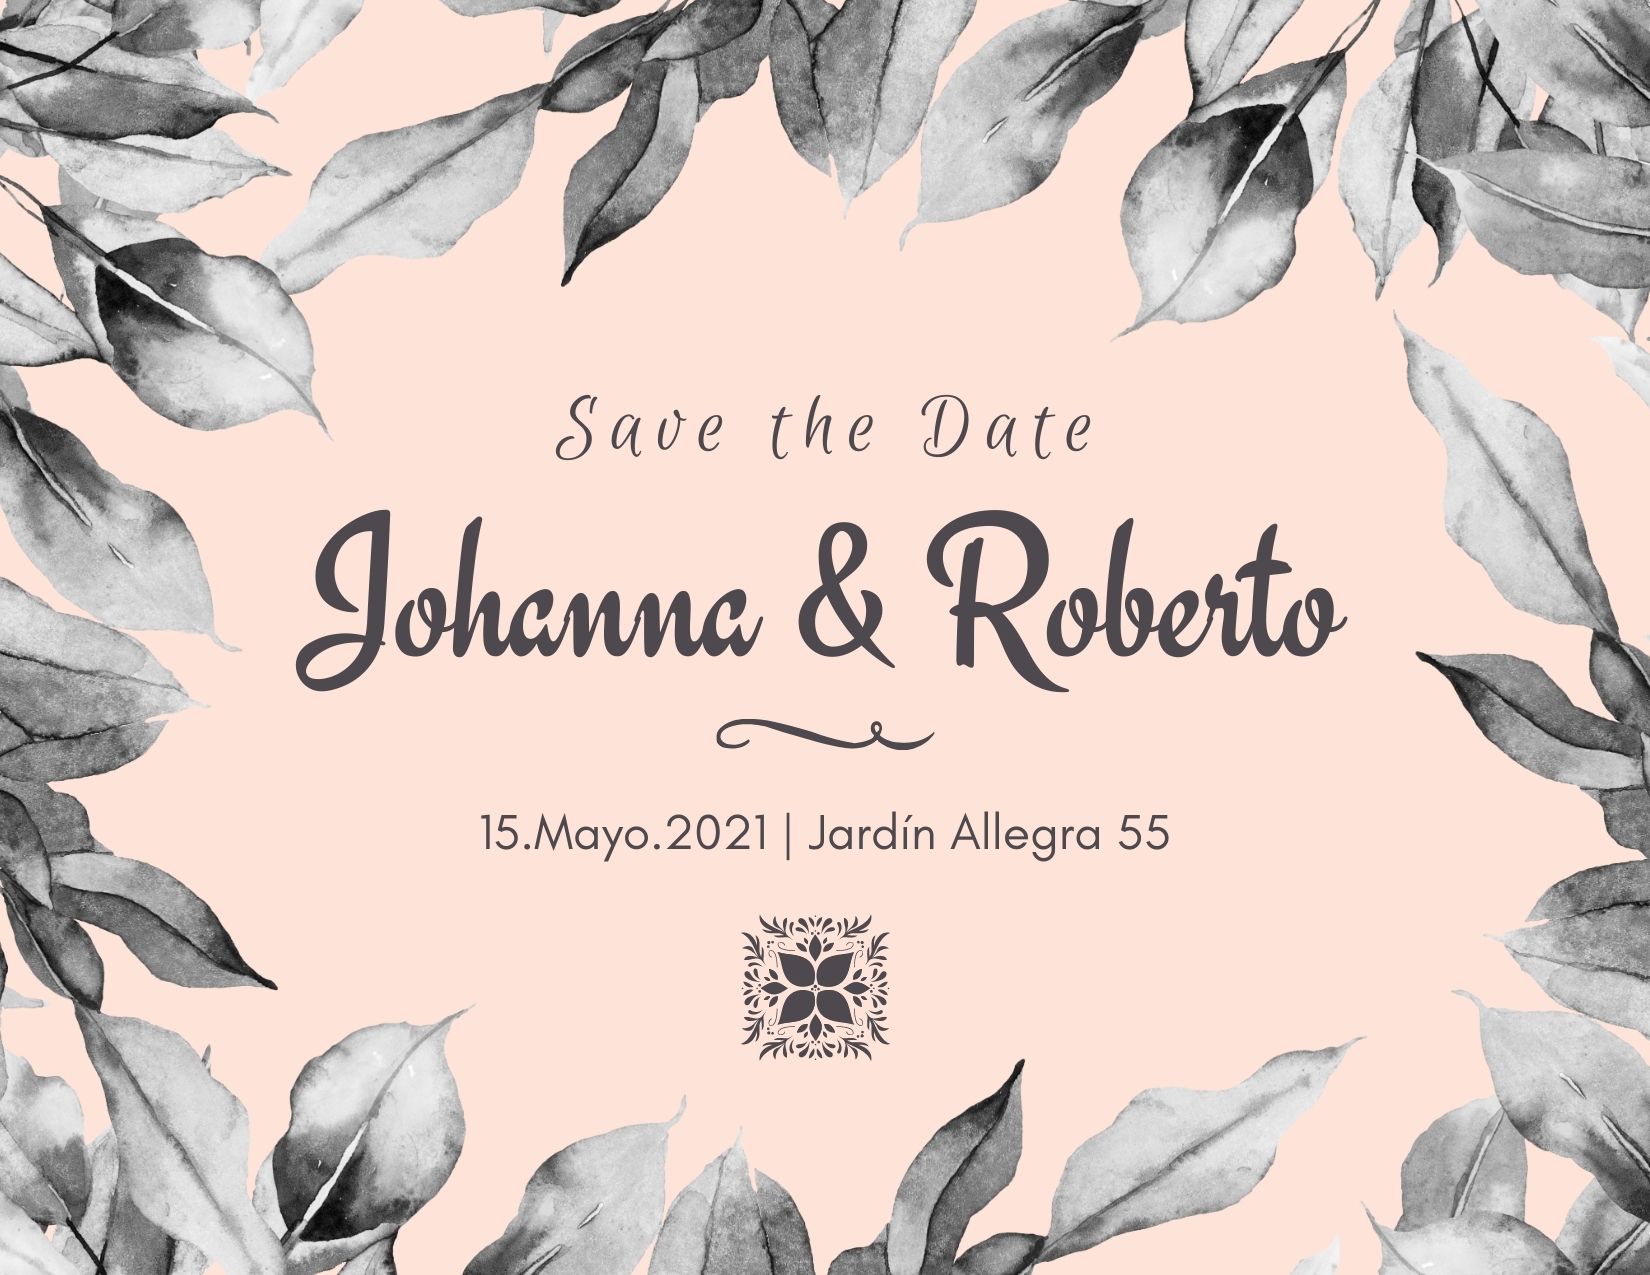 Save the Date (5)